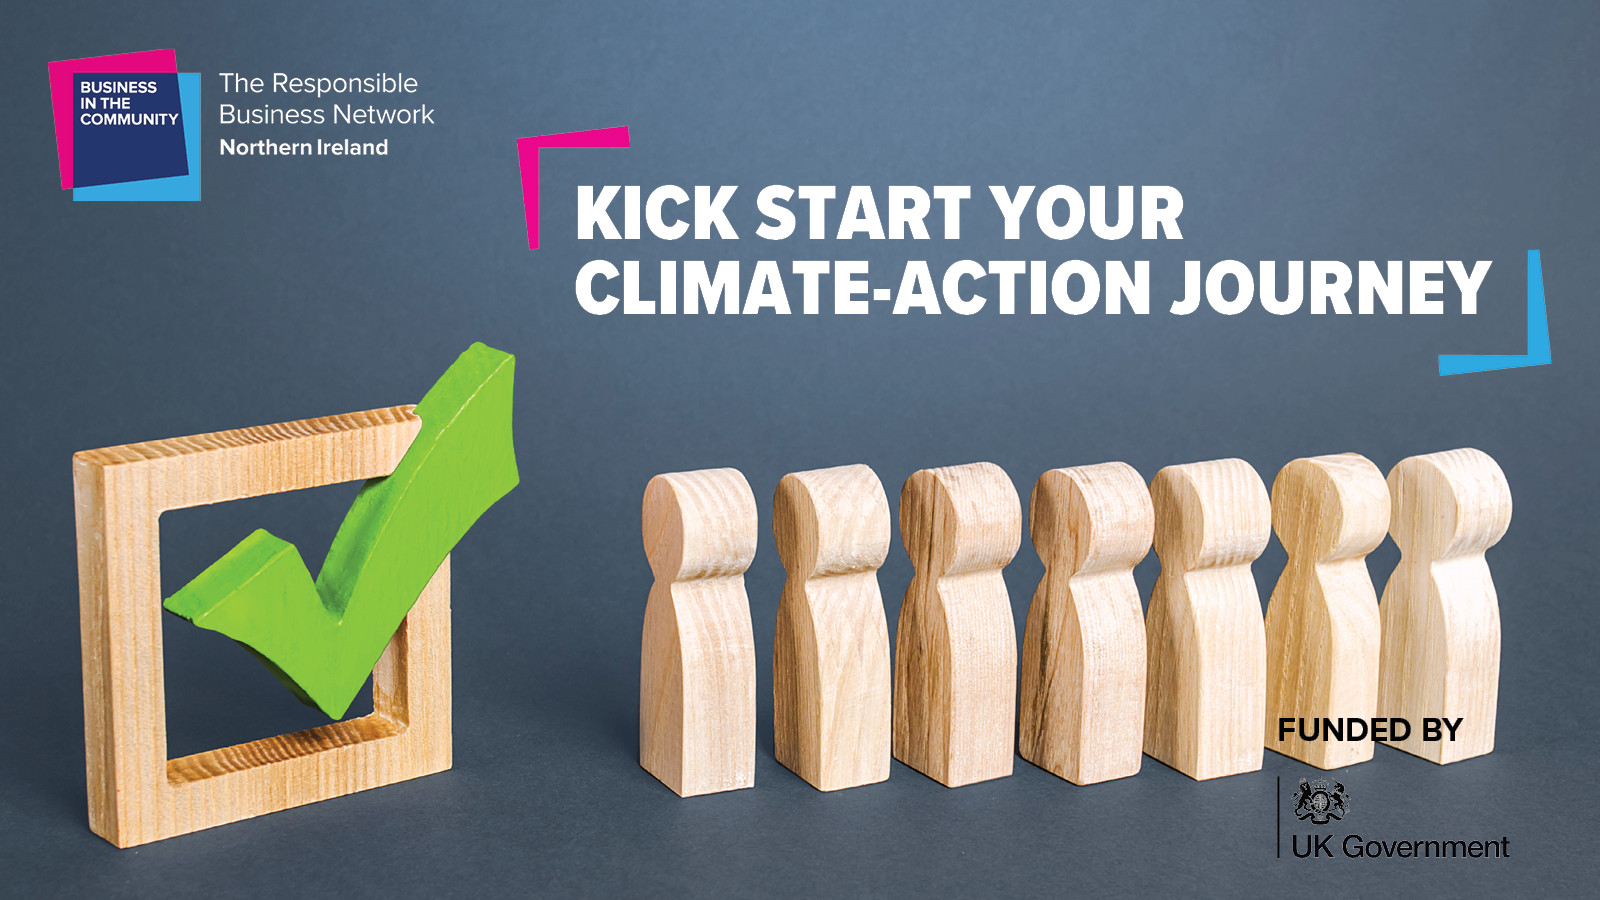 Business in the Community is offering Places on the next Climate Action Programme